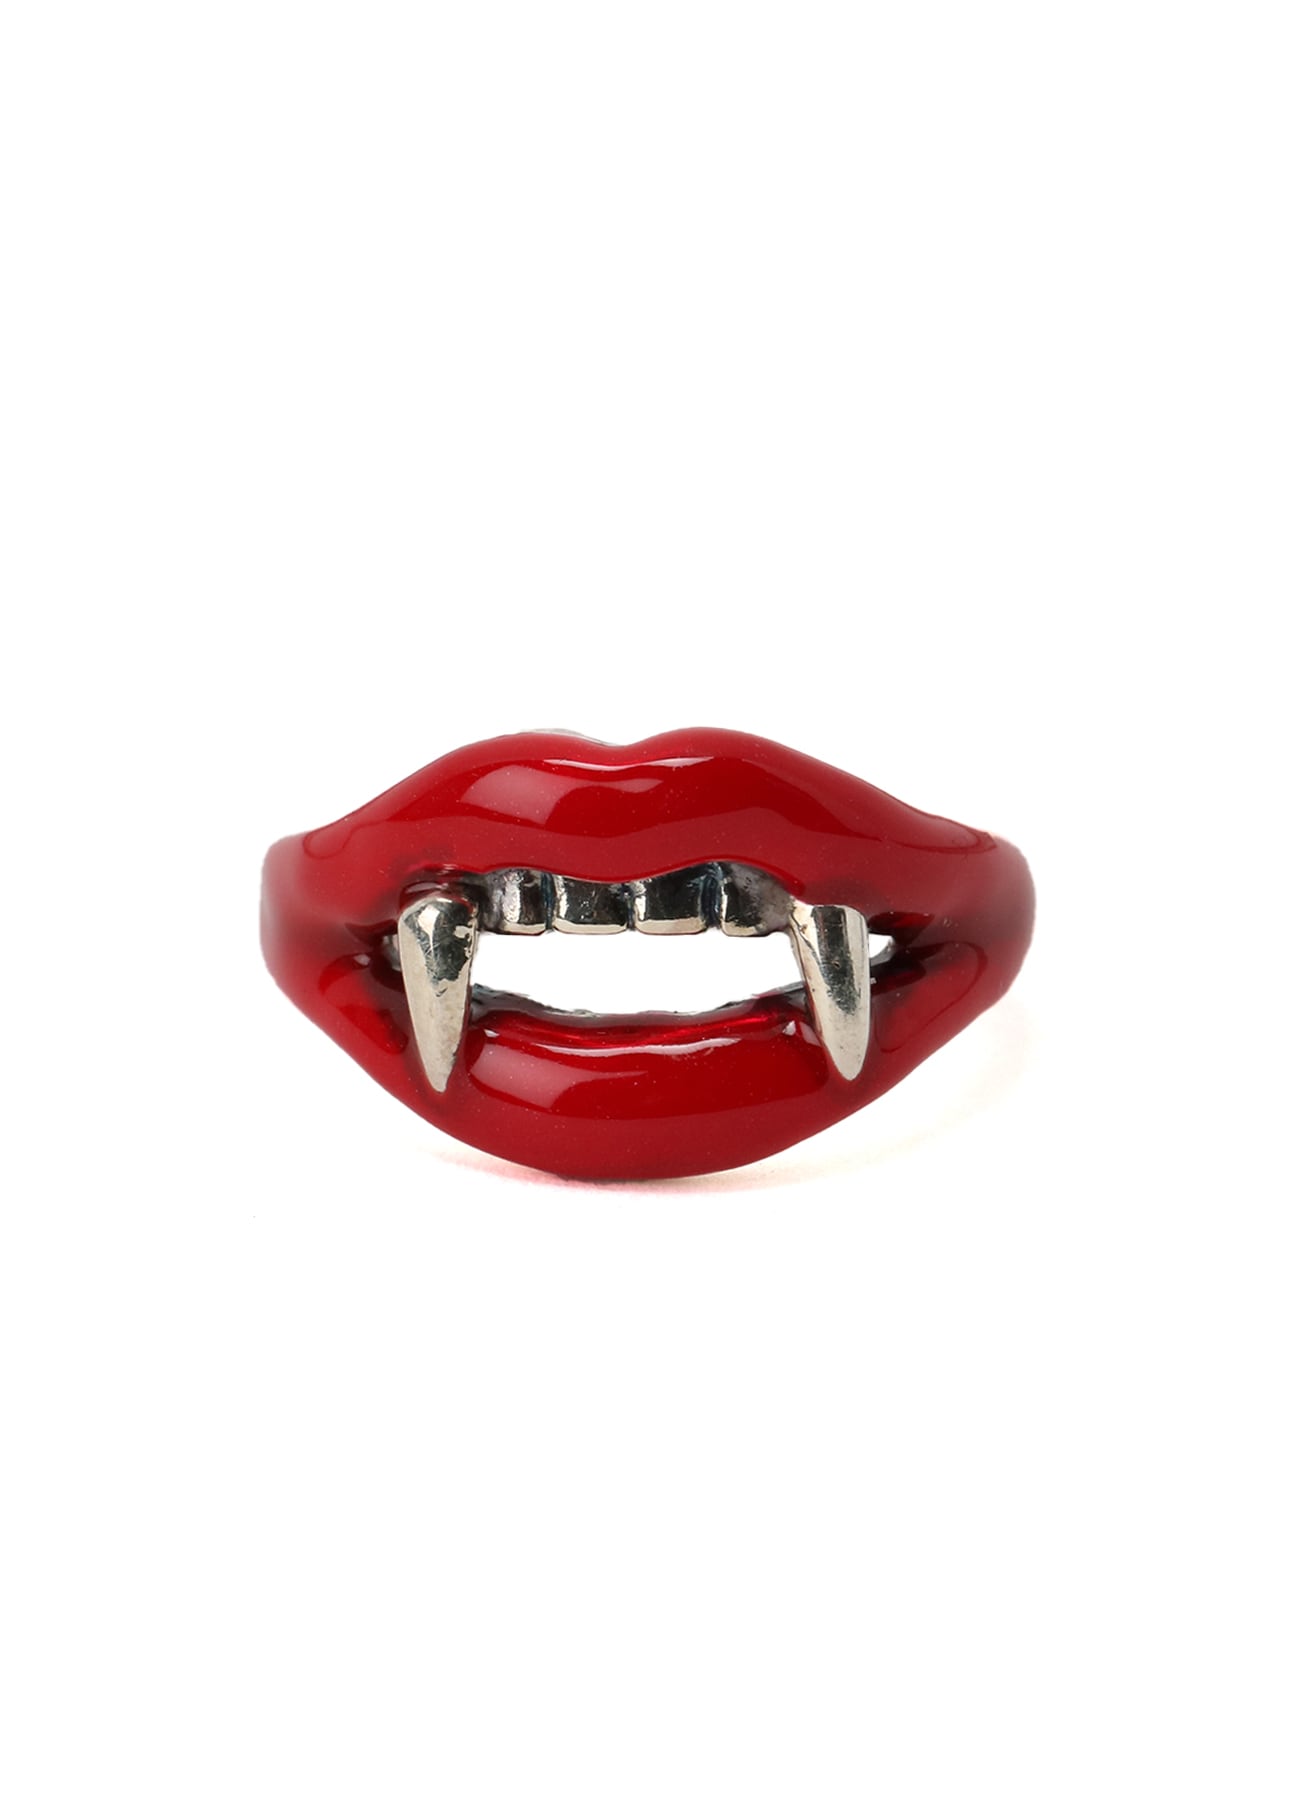 SILVER 950 VAMPIRE PINKIE RING ROUGE